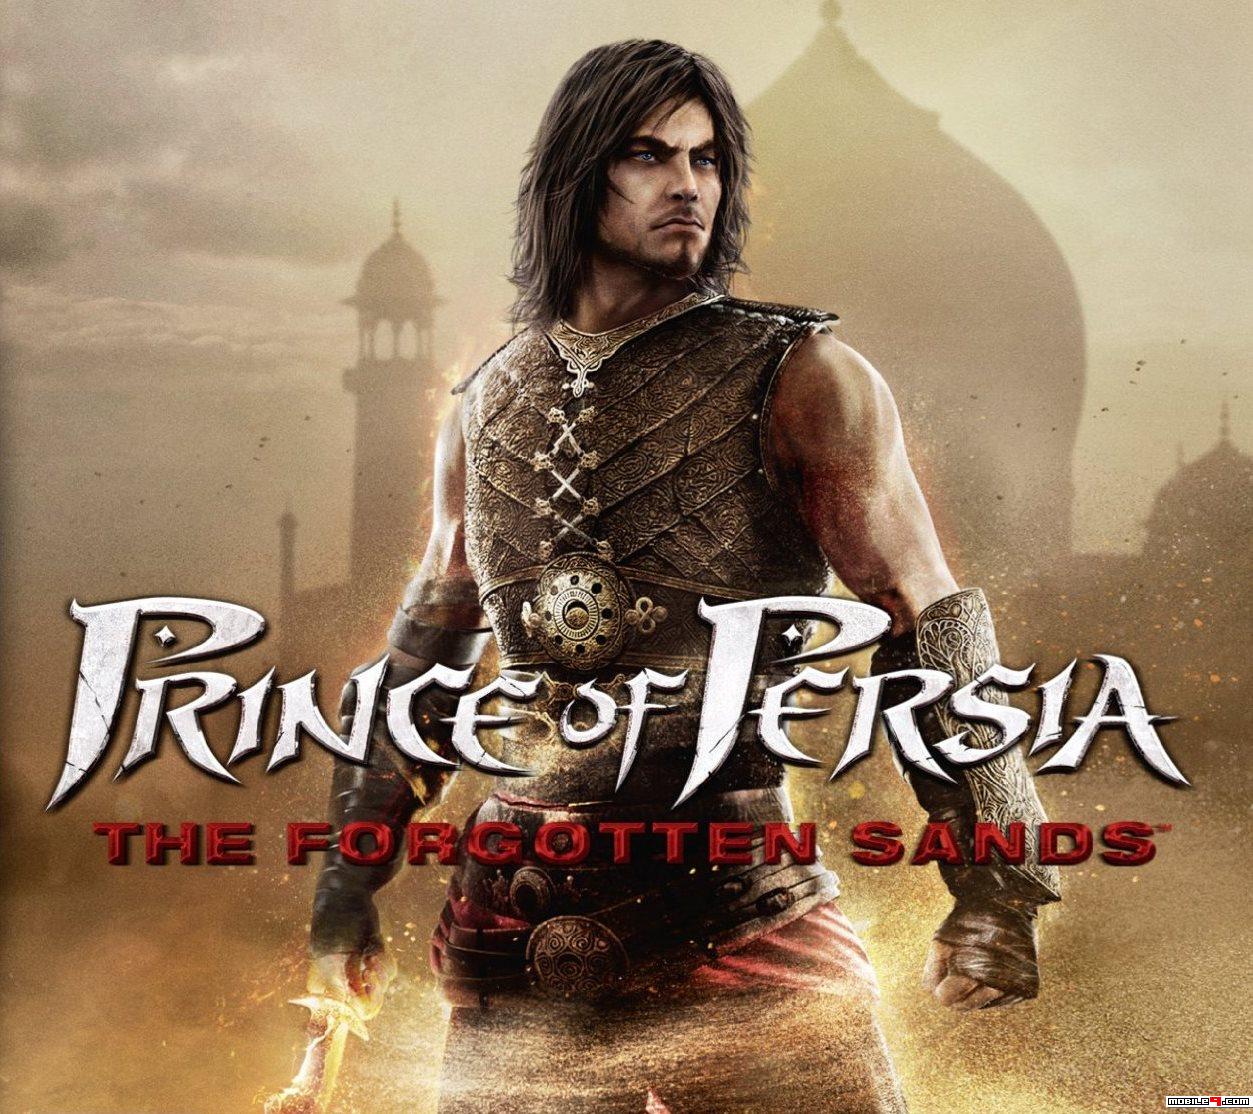 download-prince-of-persia-anime-pix-downlod-high-quality-wallpaper-the-forgotten-sands-android-games-apk-computer.jpg